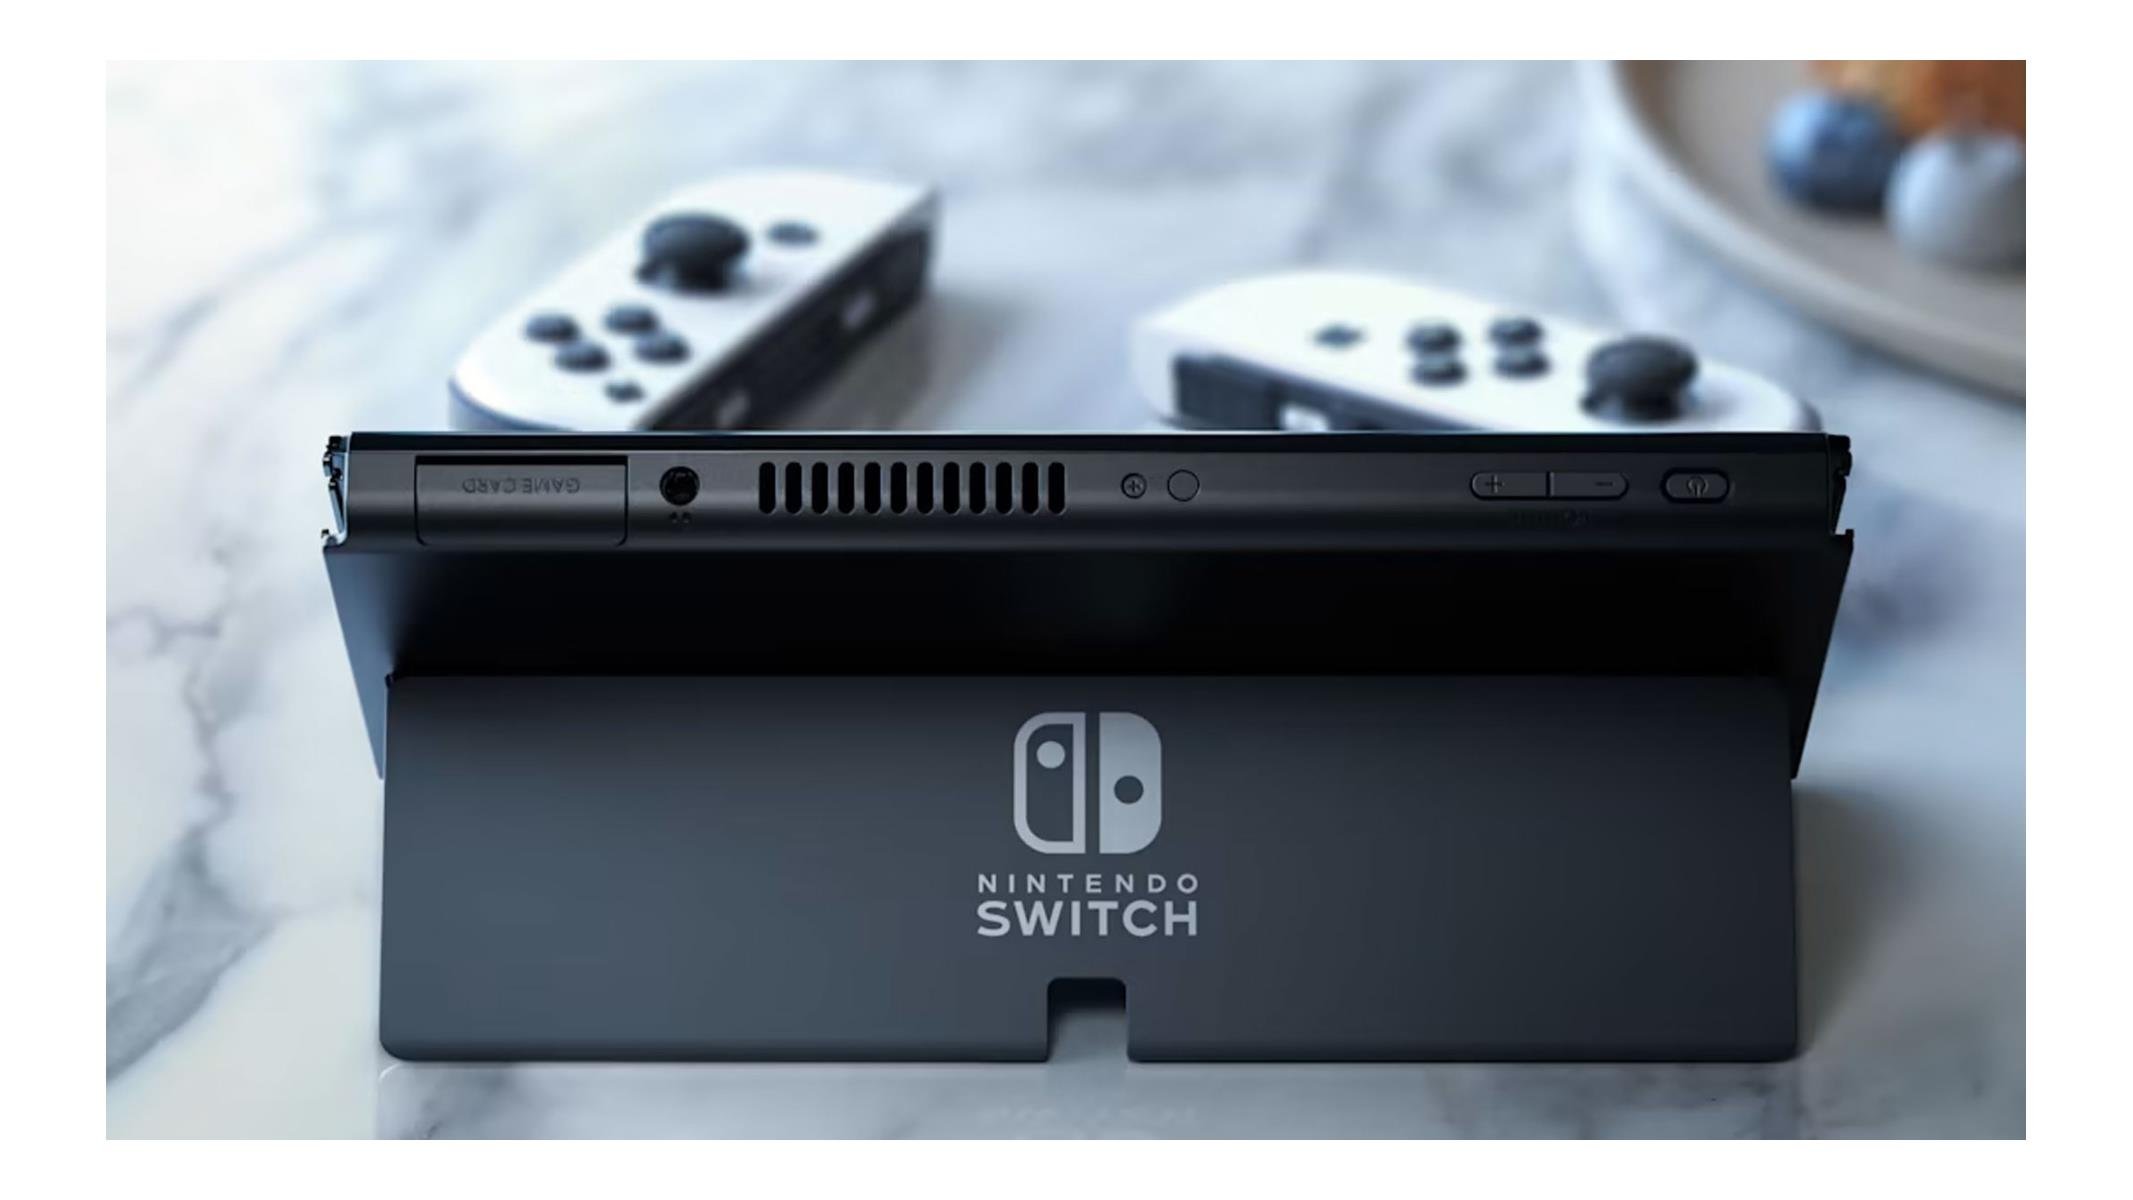 Nintendo Switch 2 might not be far away, and it sounds like a monster